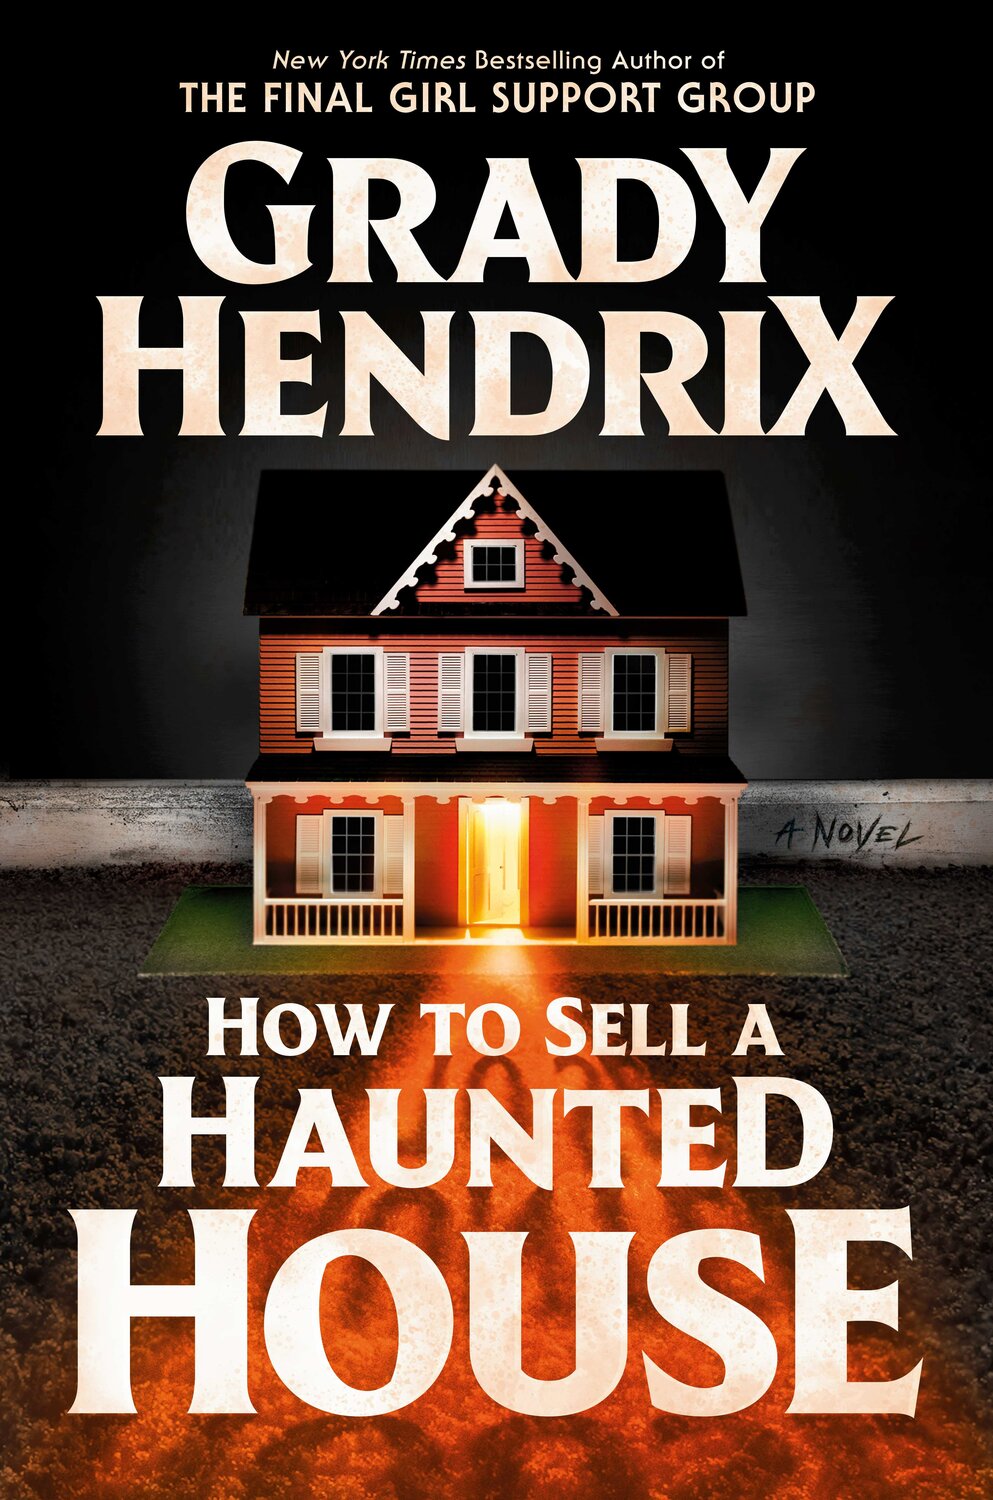 'How to Sell a Haunted House'